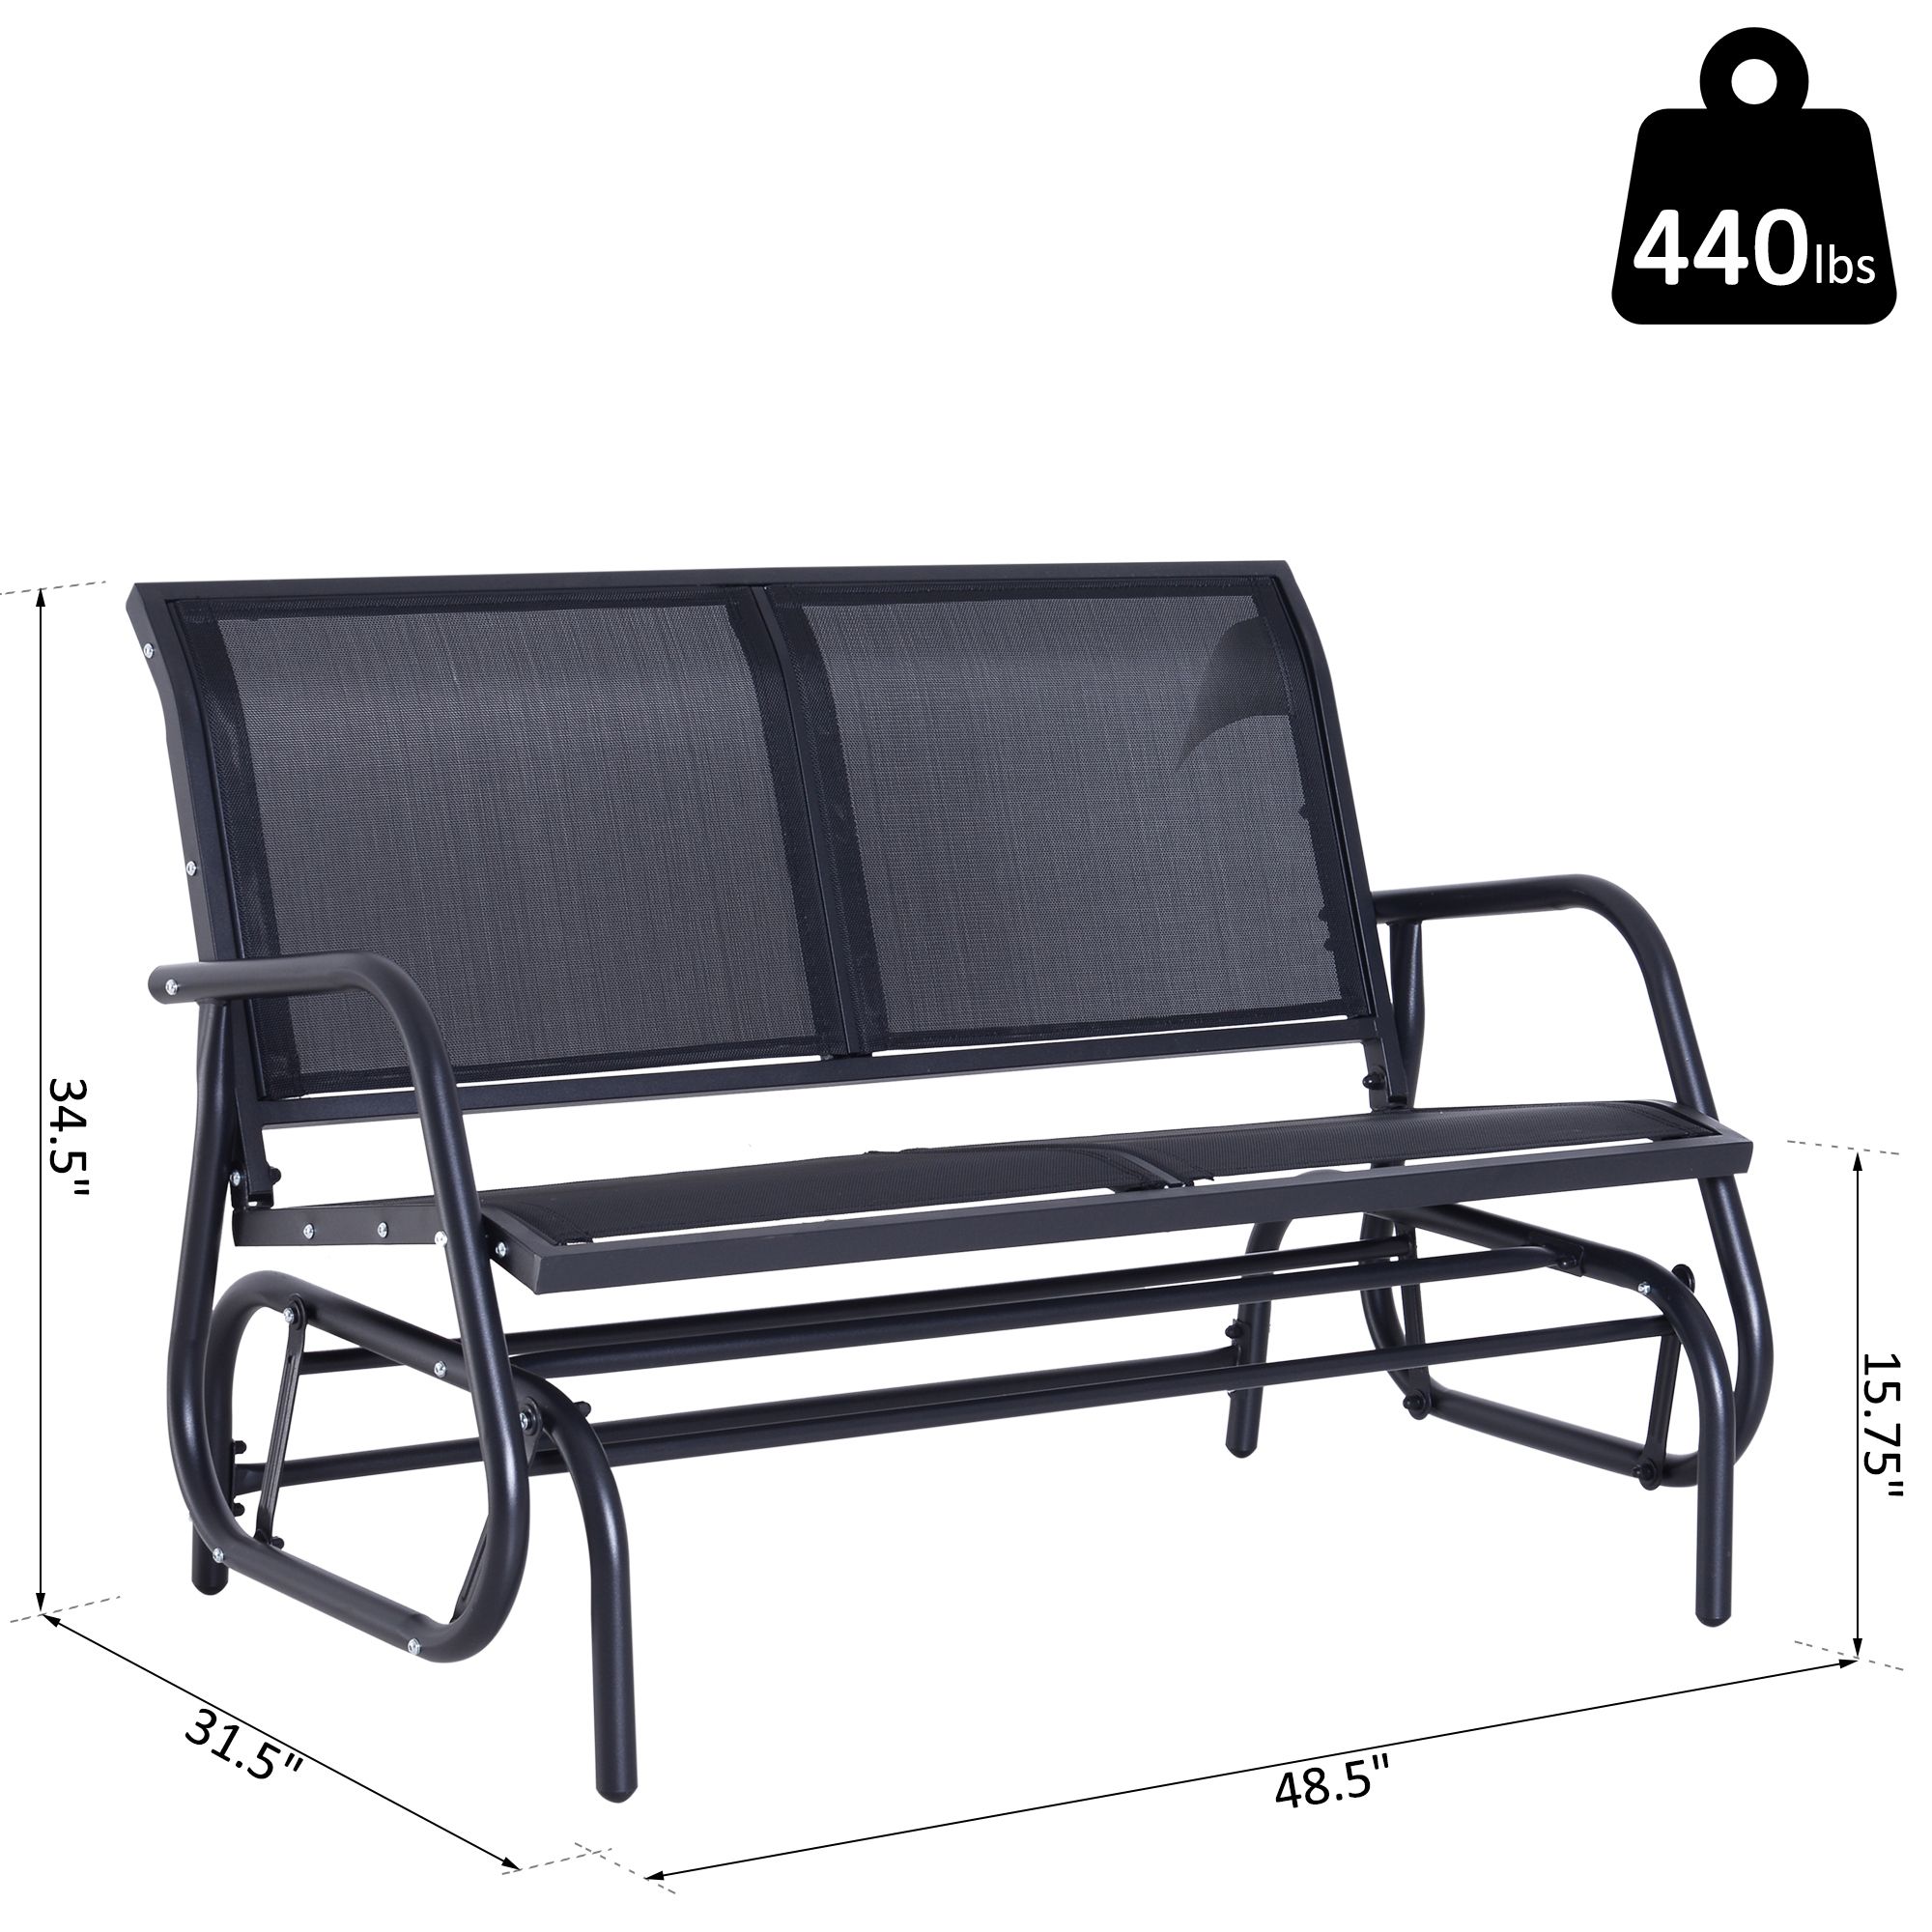 Outsunny Steel Sling Fabric Outdoor Double Glider Rocking Intended For Sling Double Glider Benches (View 9 of 25)